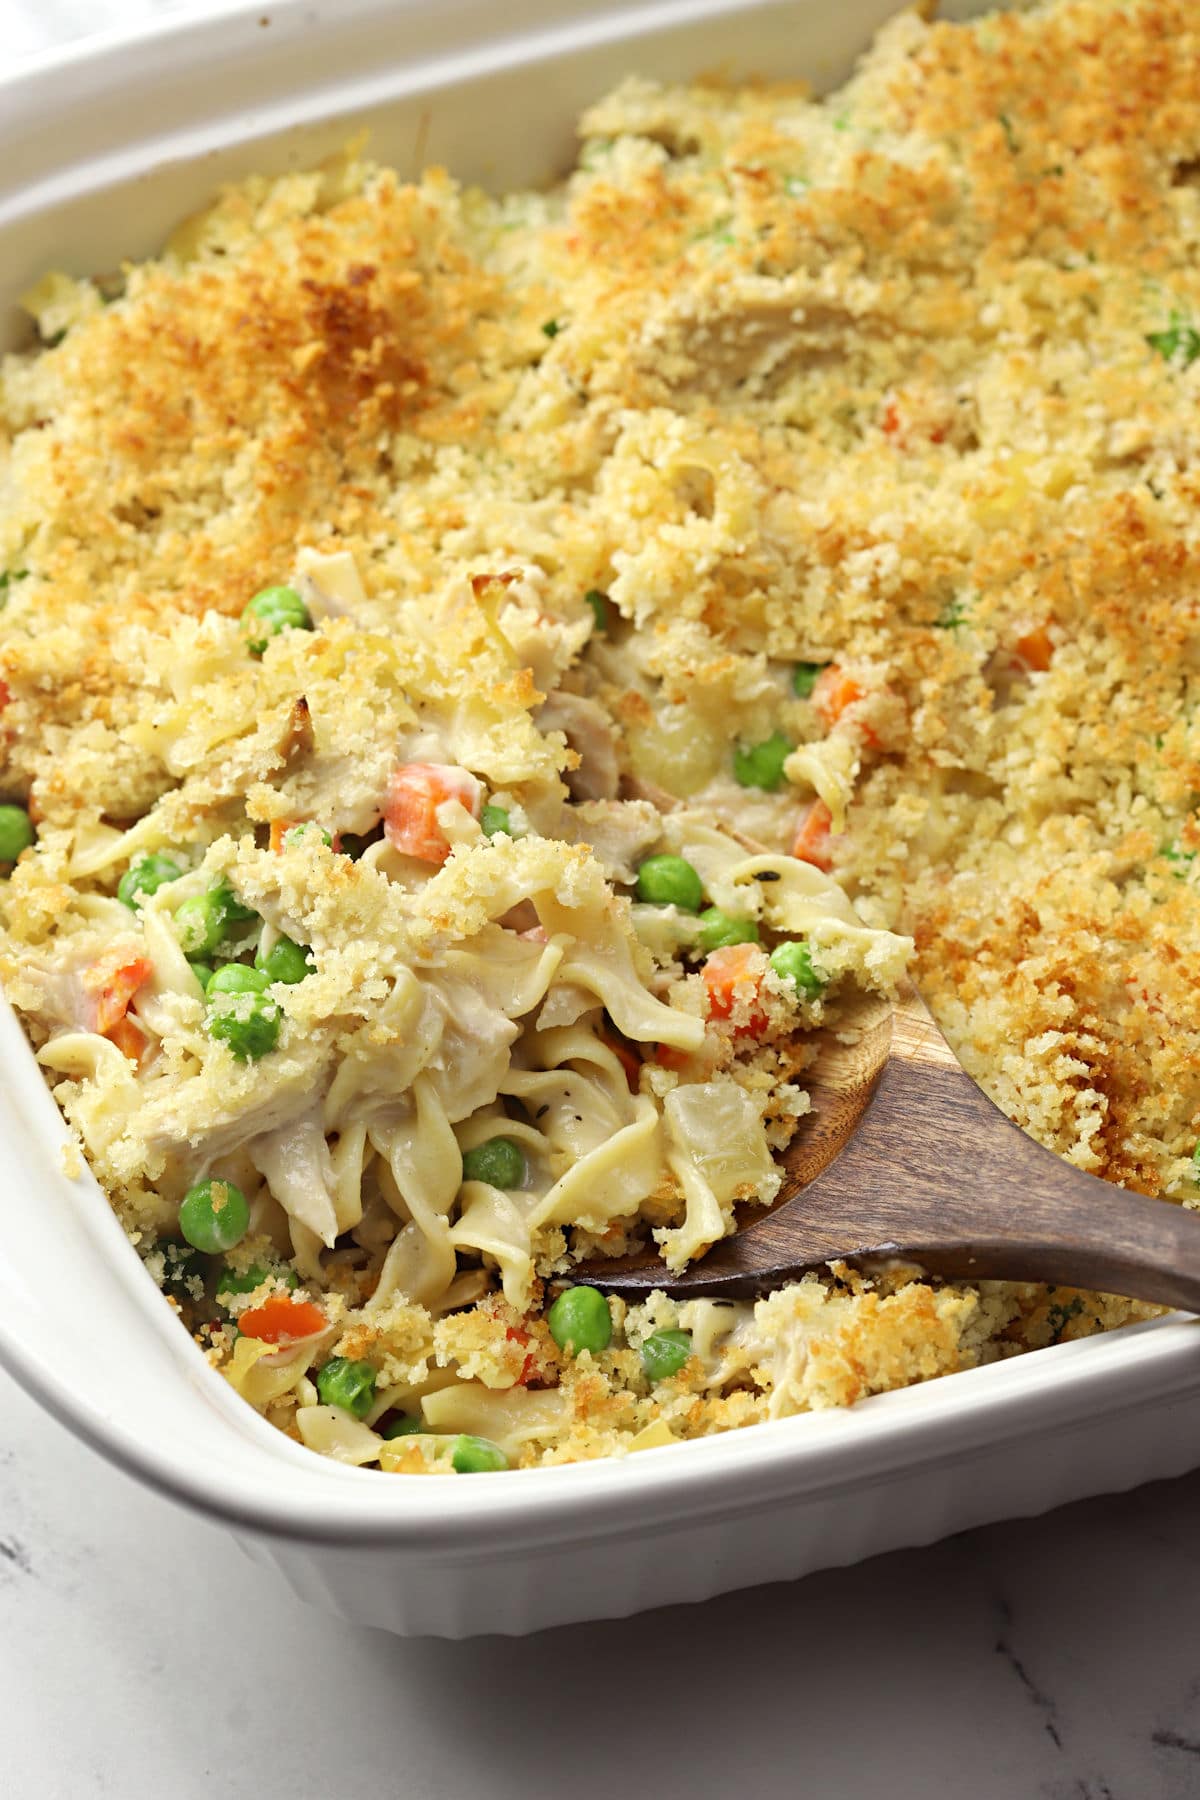 A wooden spoon scooping noodles, chicken, and veggies in a creamy sauce from a white casserole dish.